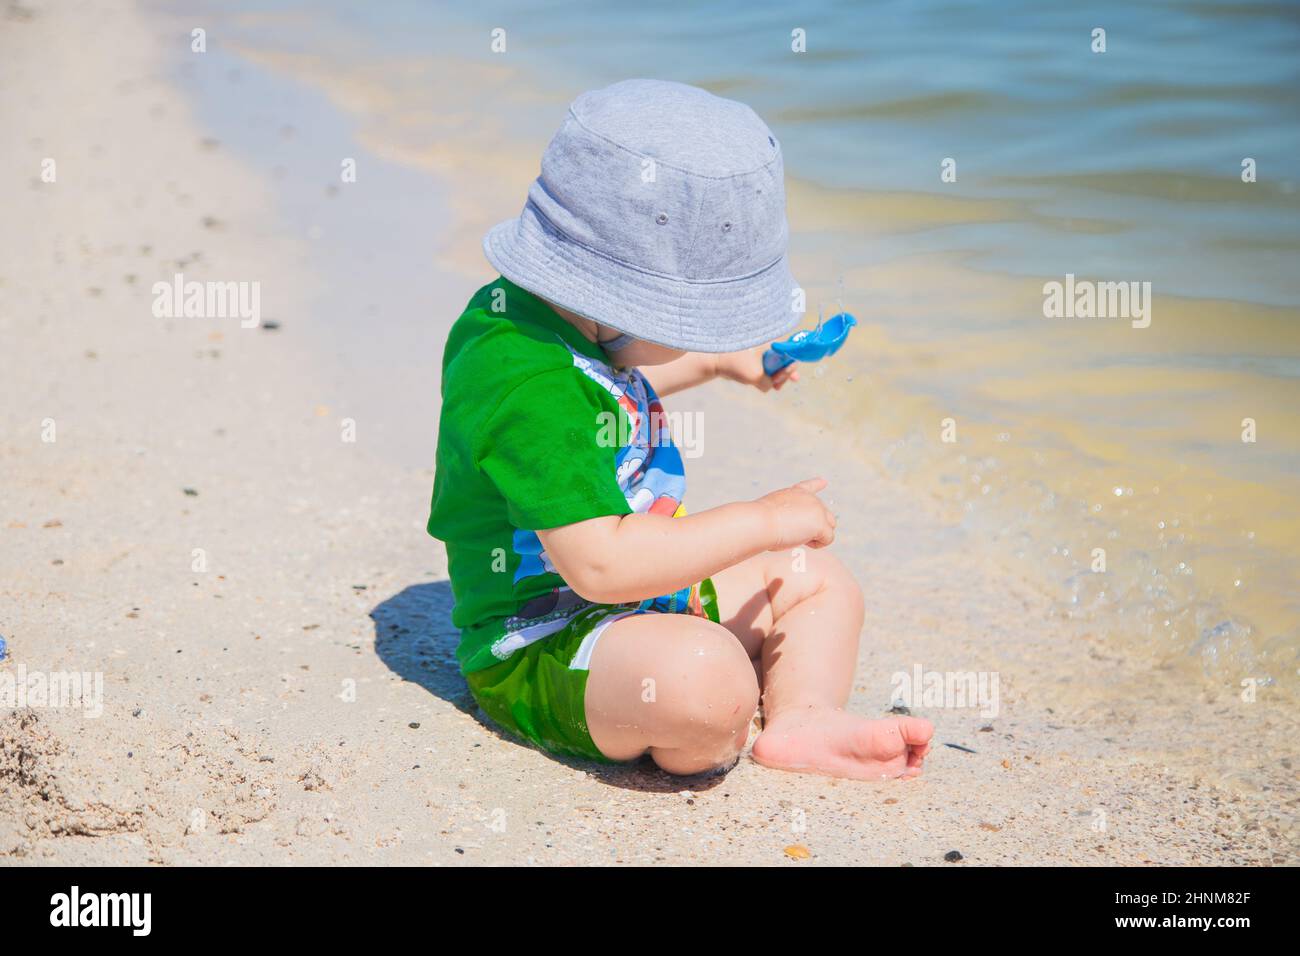 A little boy is sitting in a panama hat on the sand at the water's edge and playing with a shovel. Stock Photo